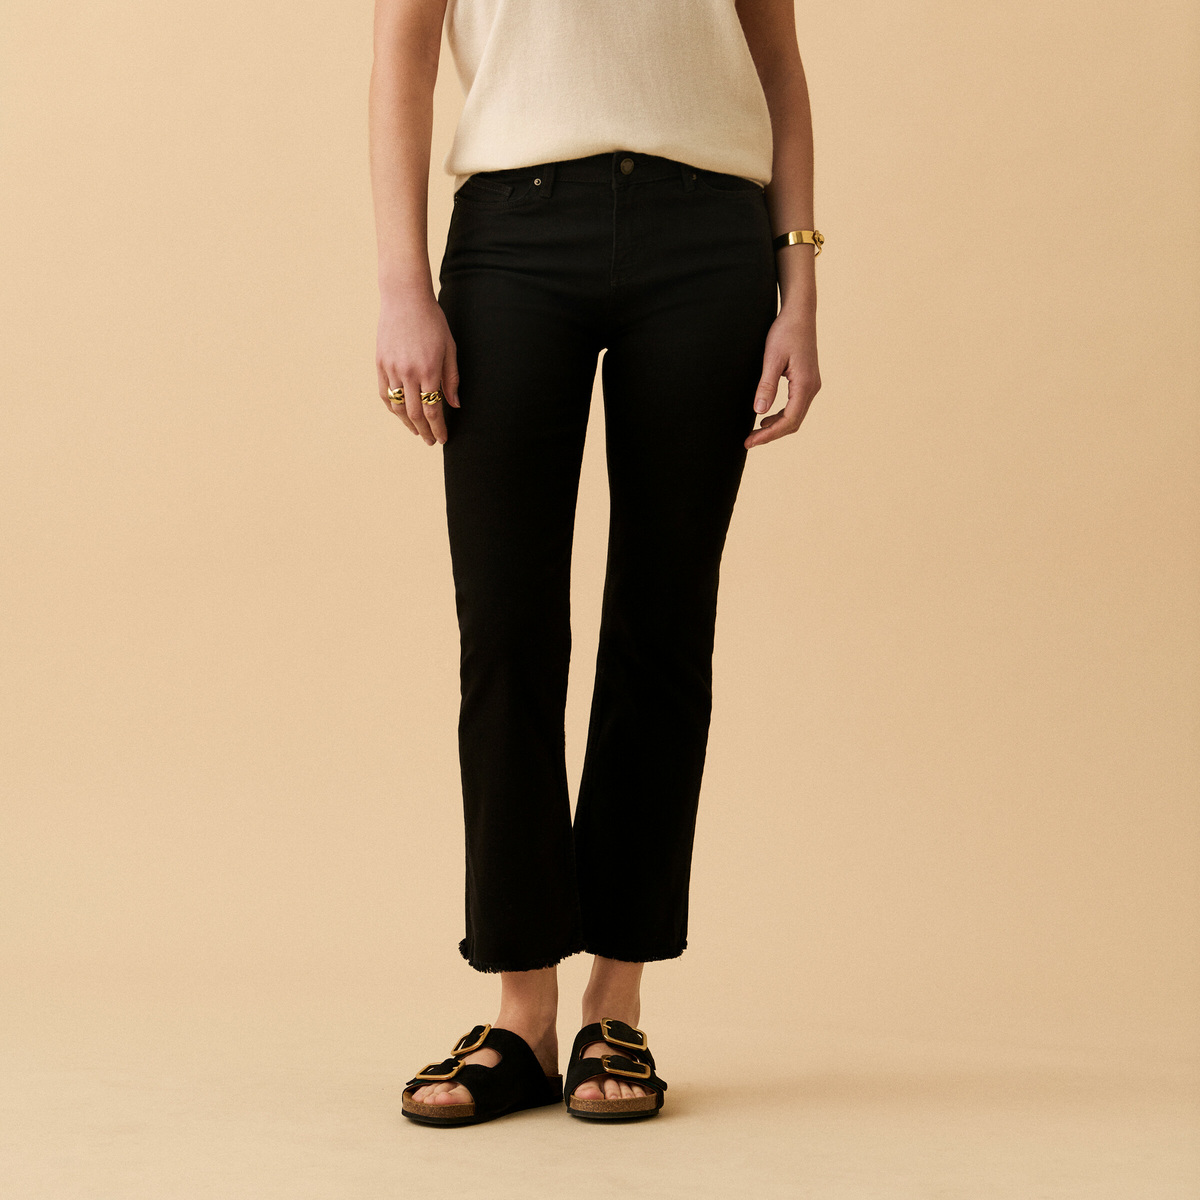 Cropped Jean Sol, Black - Cropped flared jean - Cotton - image 1